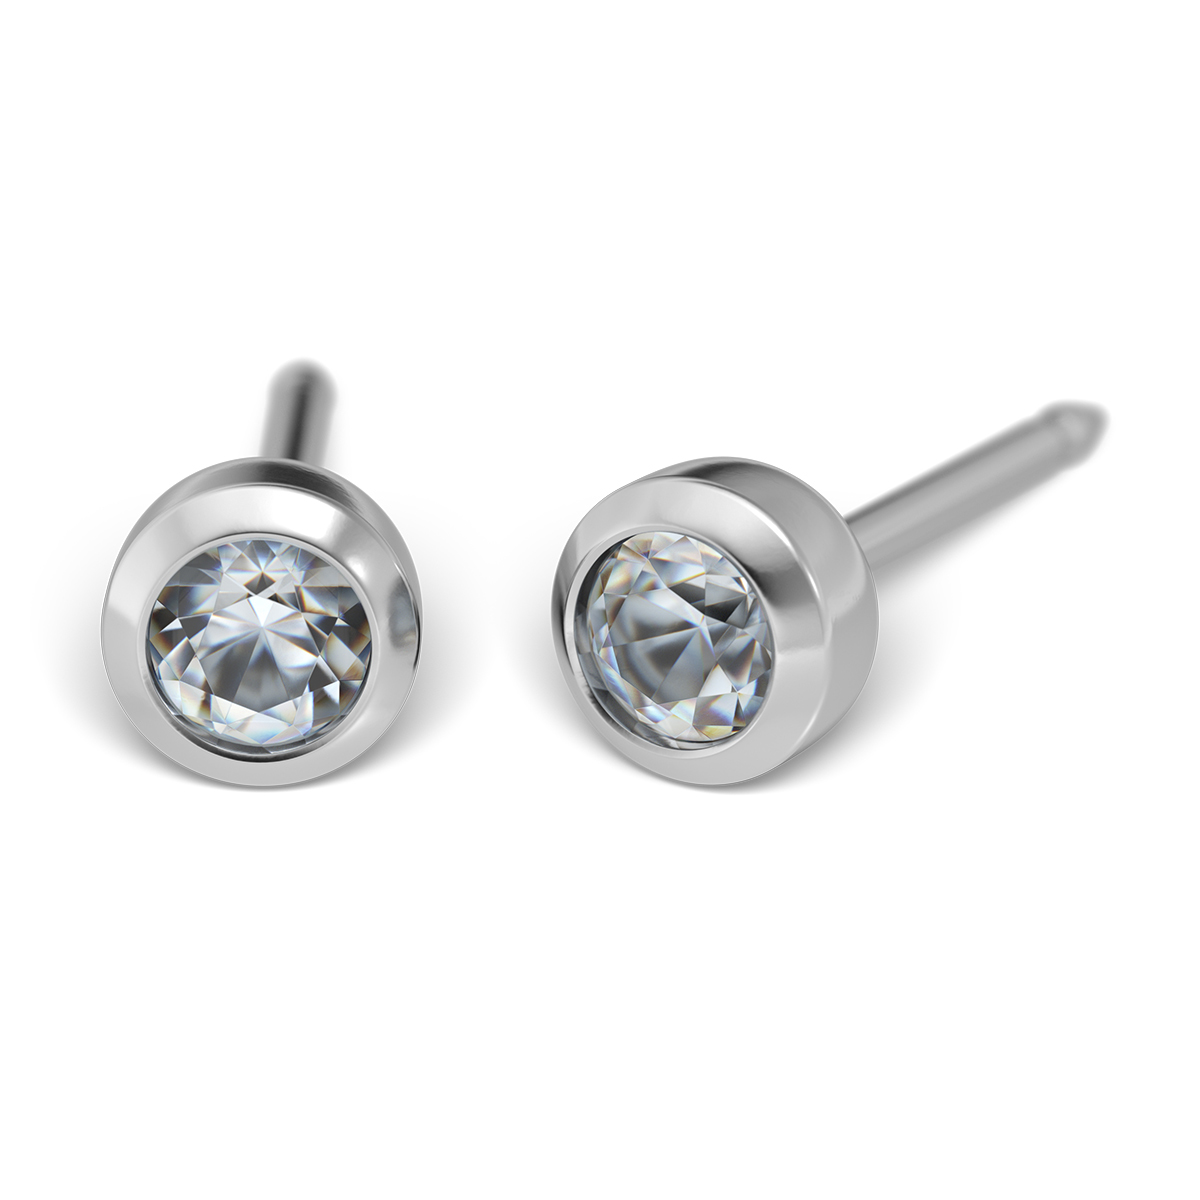 System 75 ear studs 14 ct yellow gold white rhodium plated